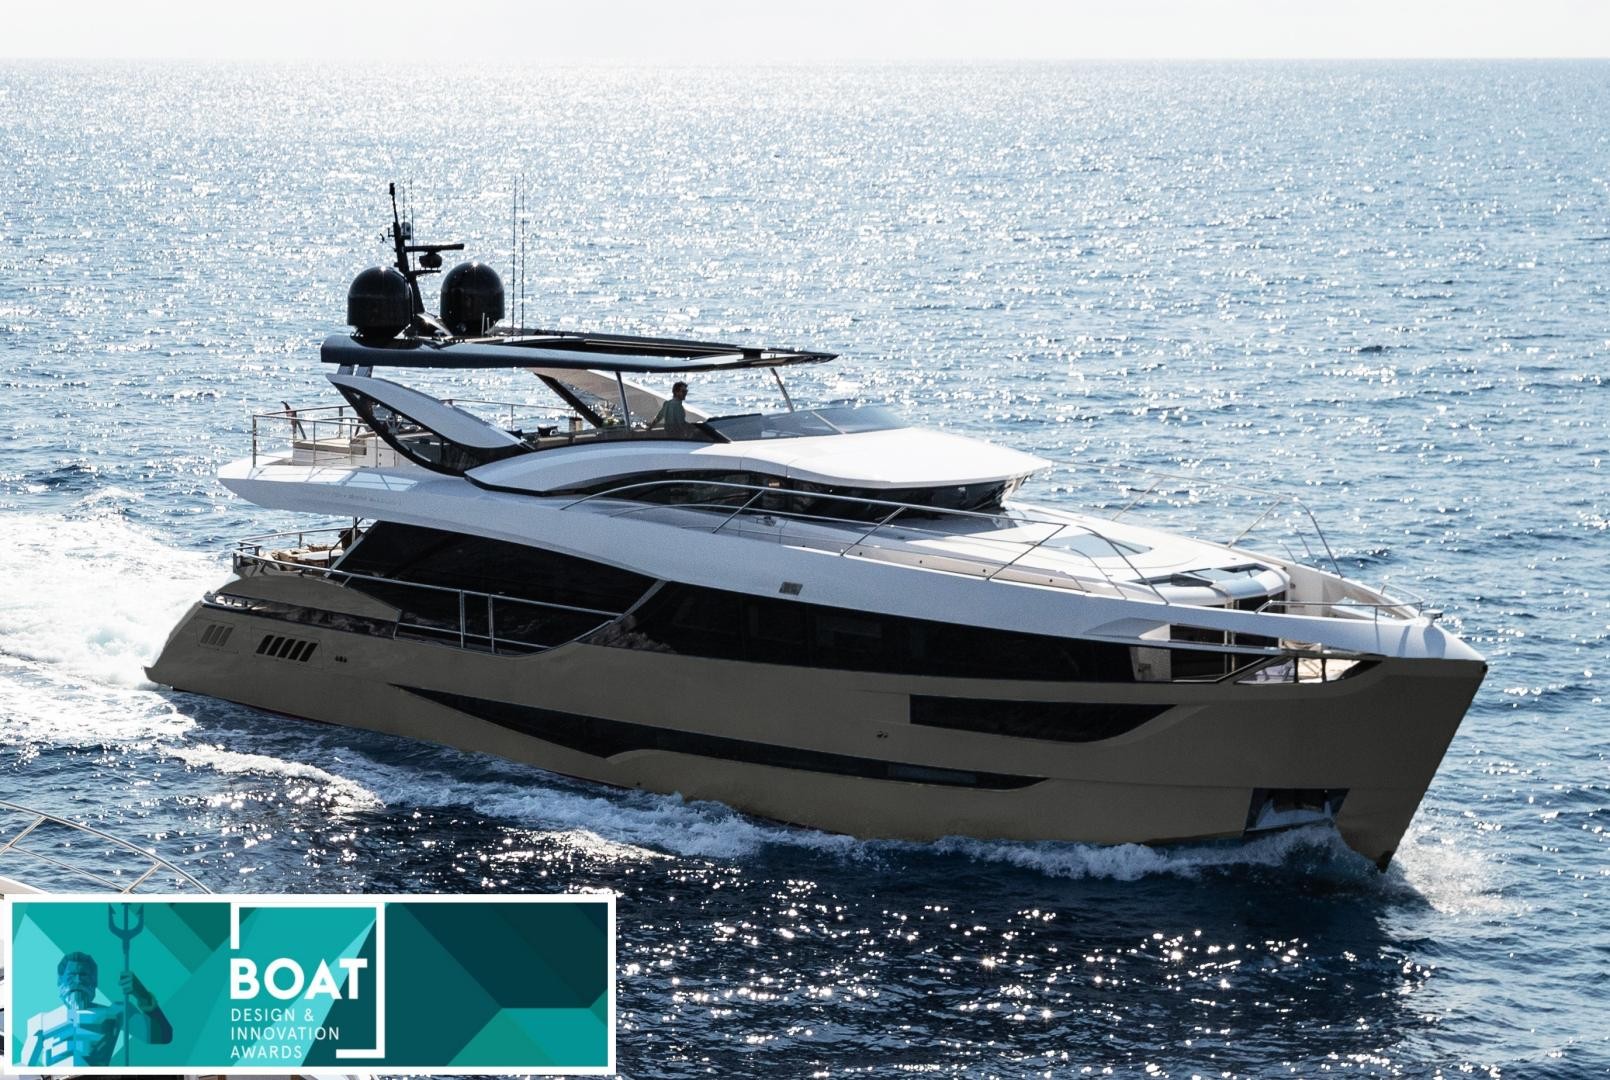 “The entries represent the breadth of the market and from year to year the quality just goes from strength to strength,” said co-chair of the panel Marilyn Mower, who is editor-at-large for BOAT International.